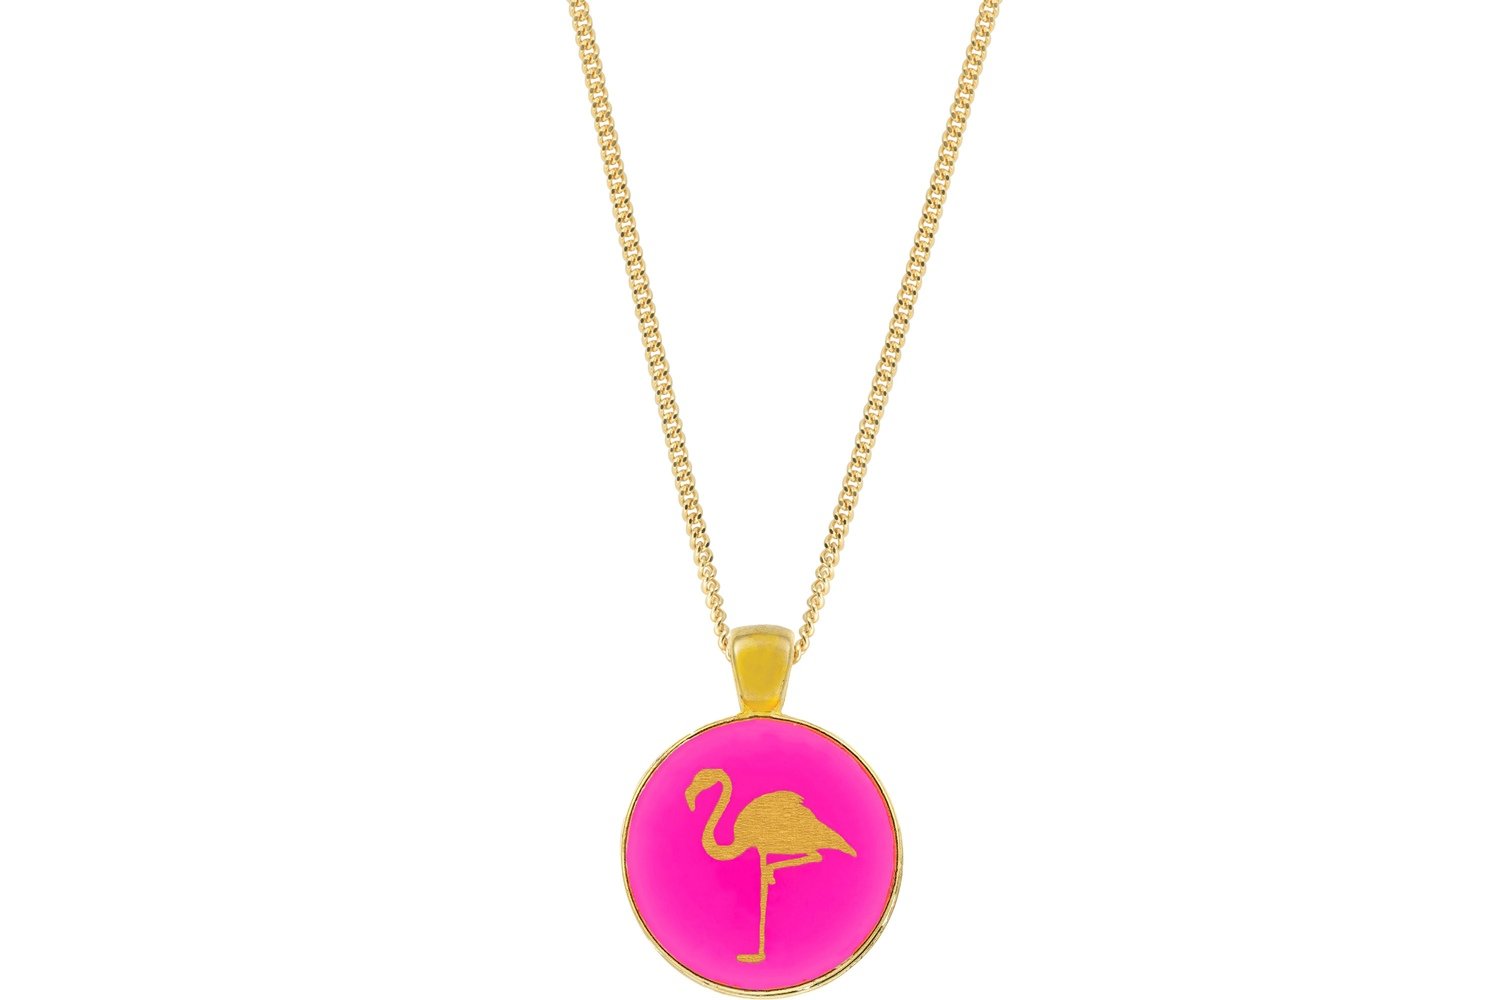 Flamingo Pendant Classic Style with Bezel on Chain Necklace